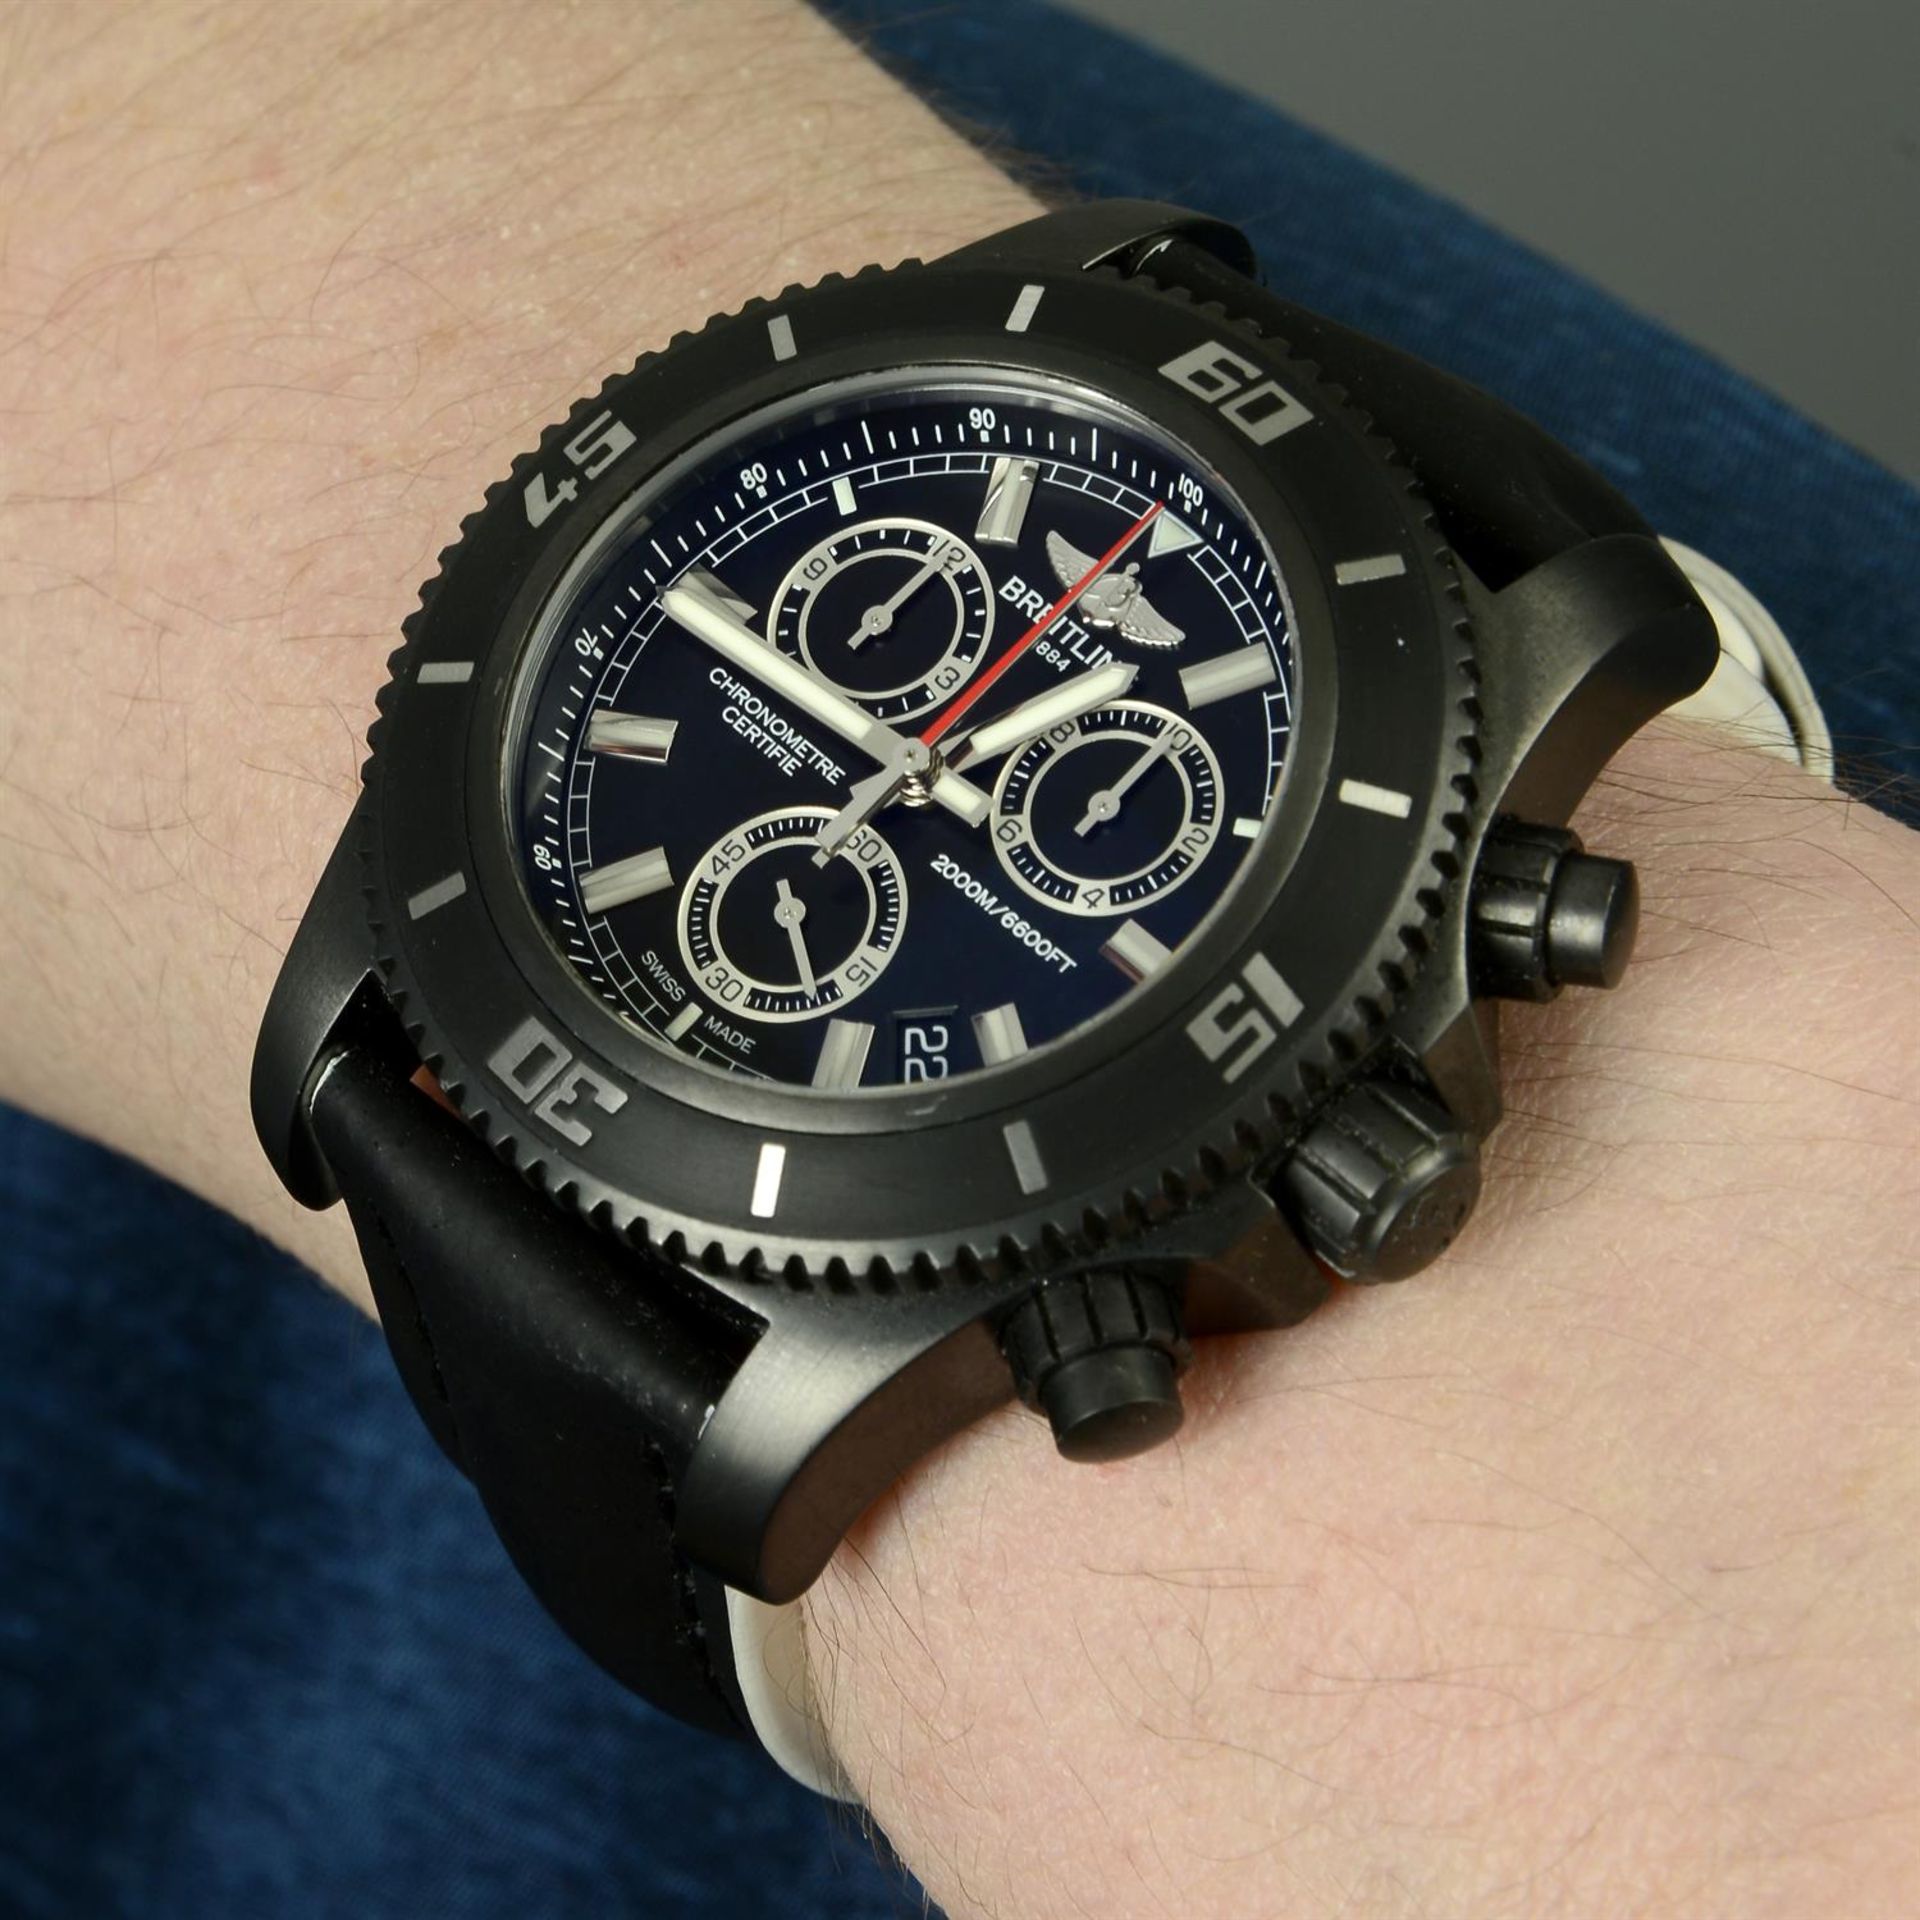 BREITLING - a PVD-treated stainless steel SuperOcean chronograph wrist watch, 44mm. - Image 6 of 6